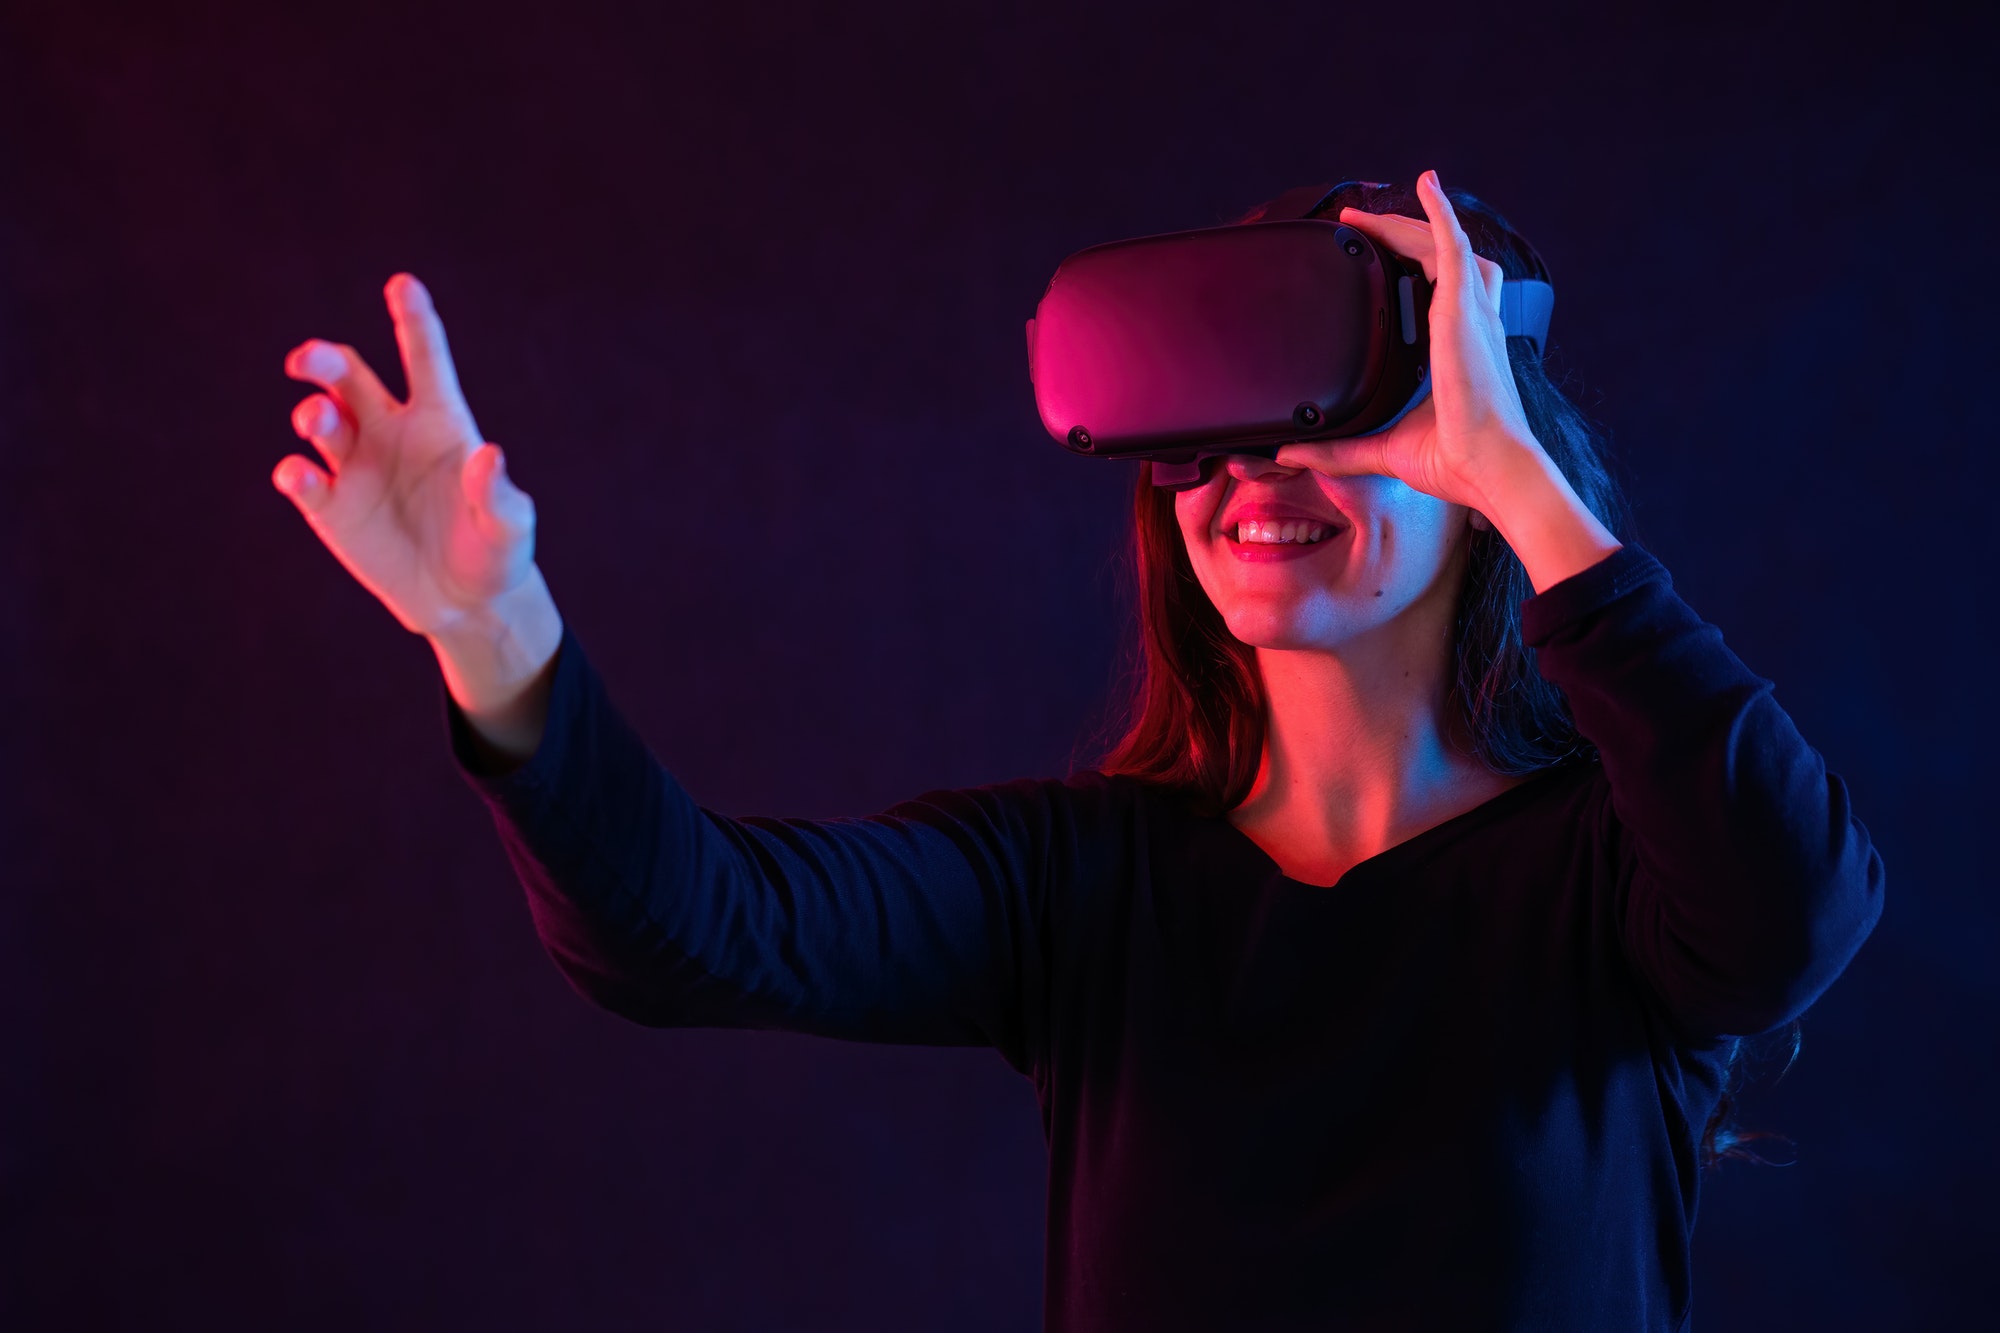 Smiling woman with headset interacting in virtual reality